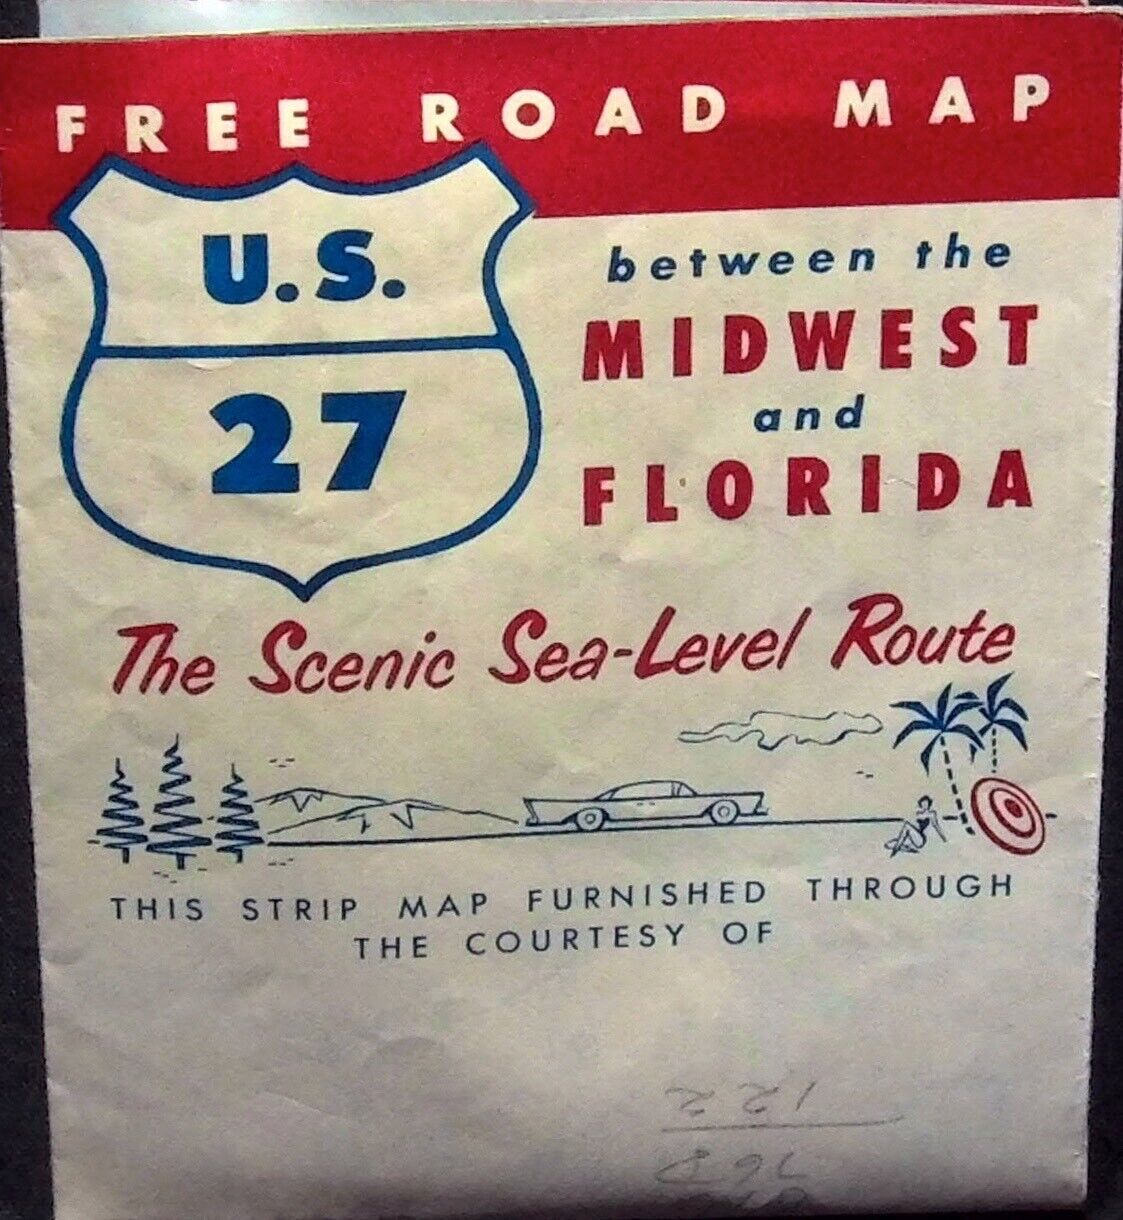 FREE ROAD MAP U.S. 27 BETWEEN THE MIDWEST AND FLORIDA THE SCENIC SEA-LEVEL ROUTE